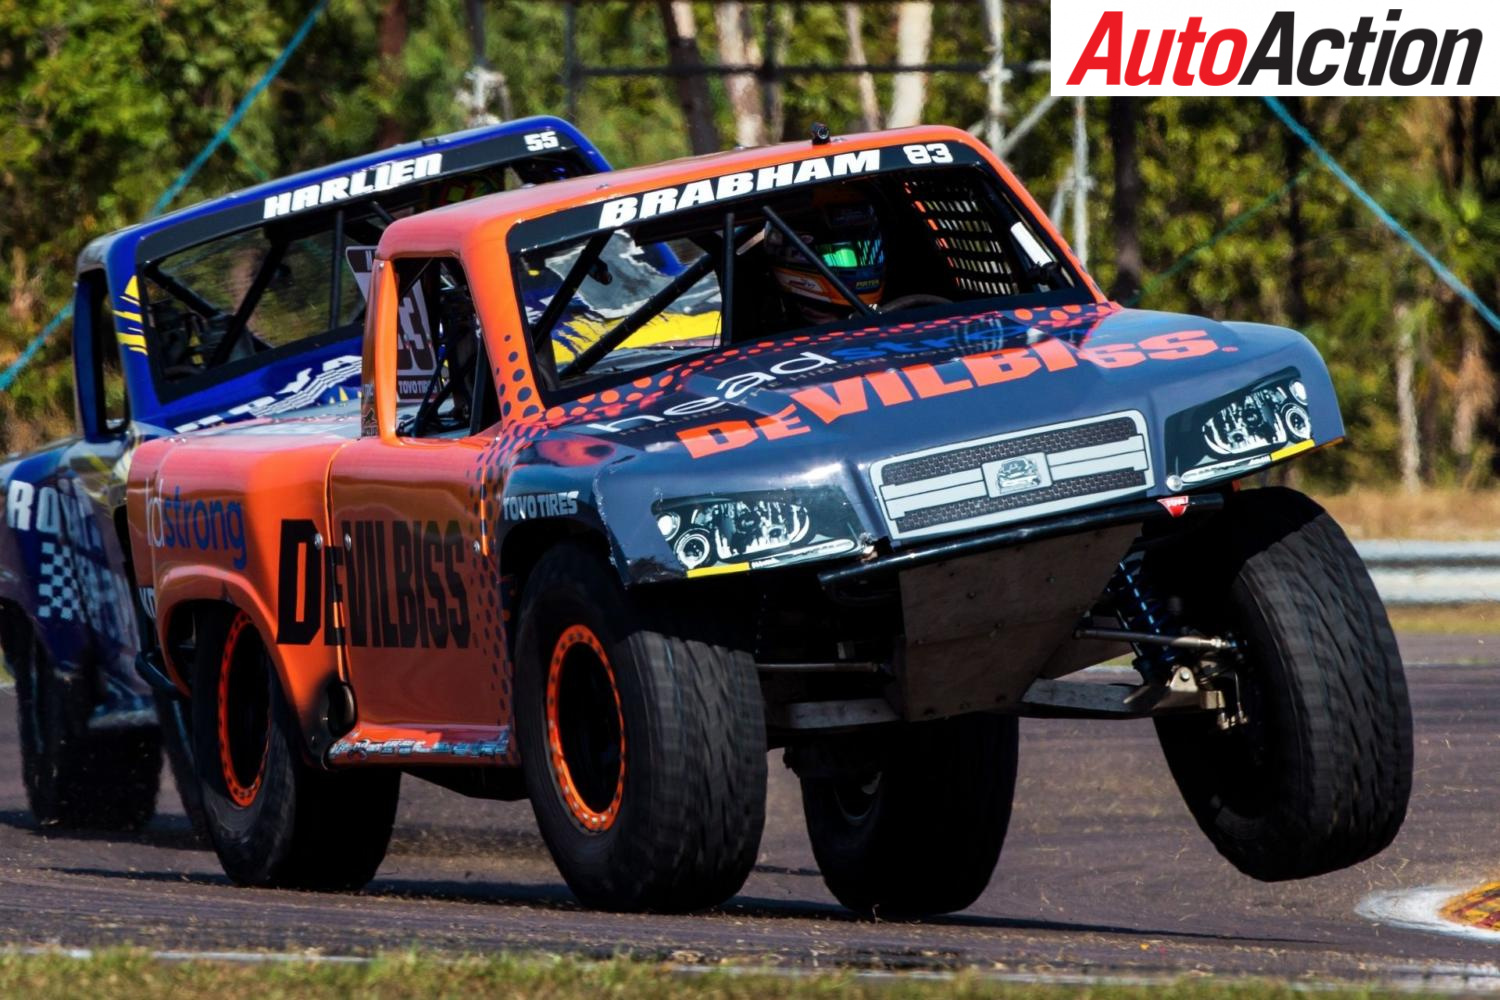 The Matt Brabham Stadium Super Truck driven by Robby Gordon during the incident competing at Hidden Valley - Photo: Dirk Klynsmith